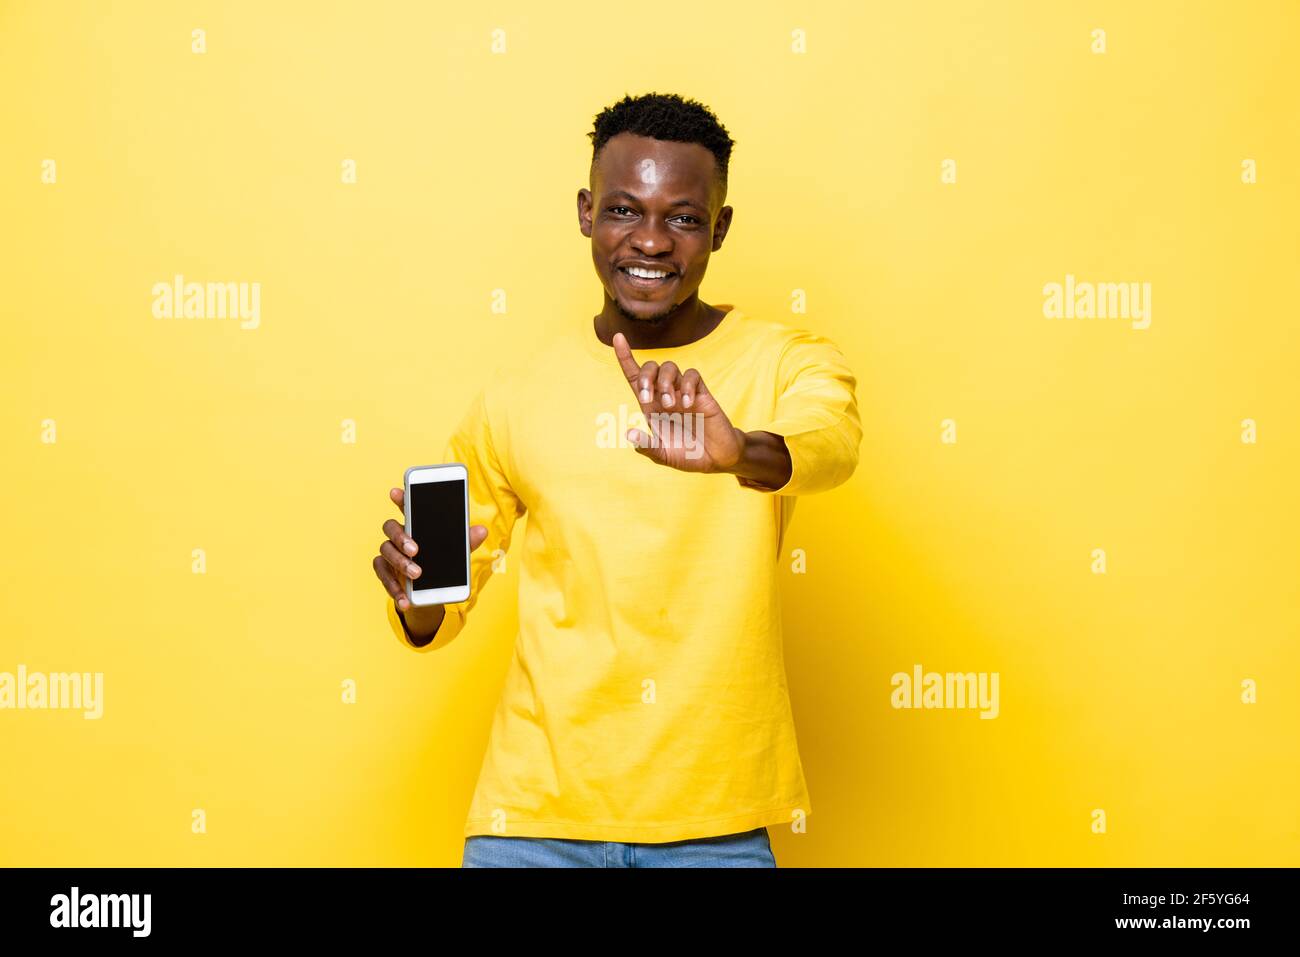 Young smiling African man holding mobile phone and doing no gesture in yellow isolated studio background Stock Photo